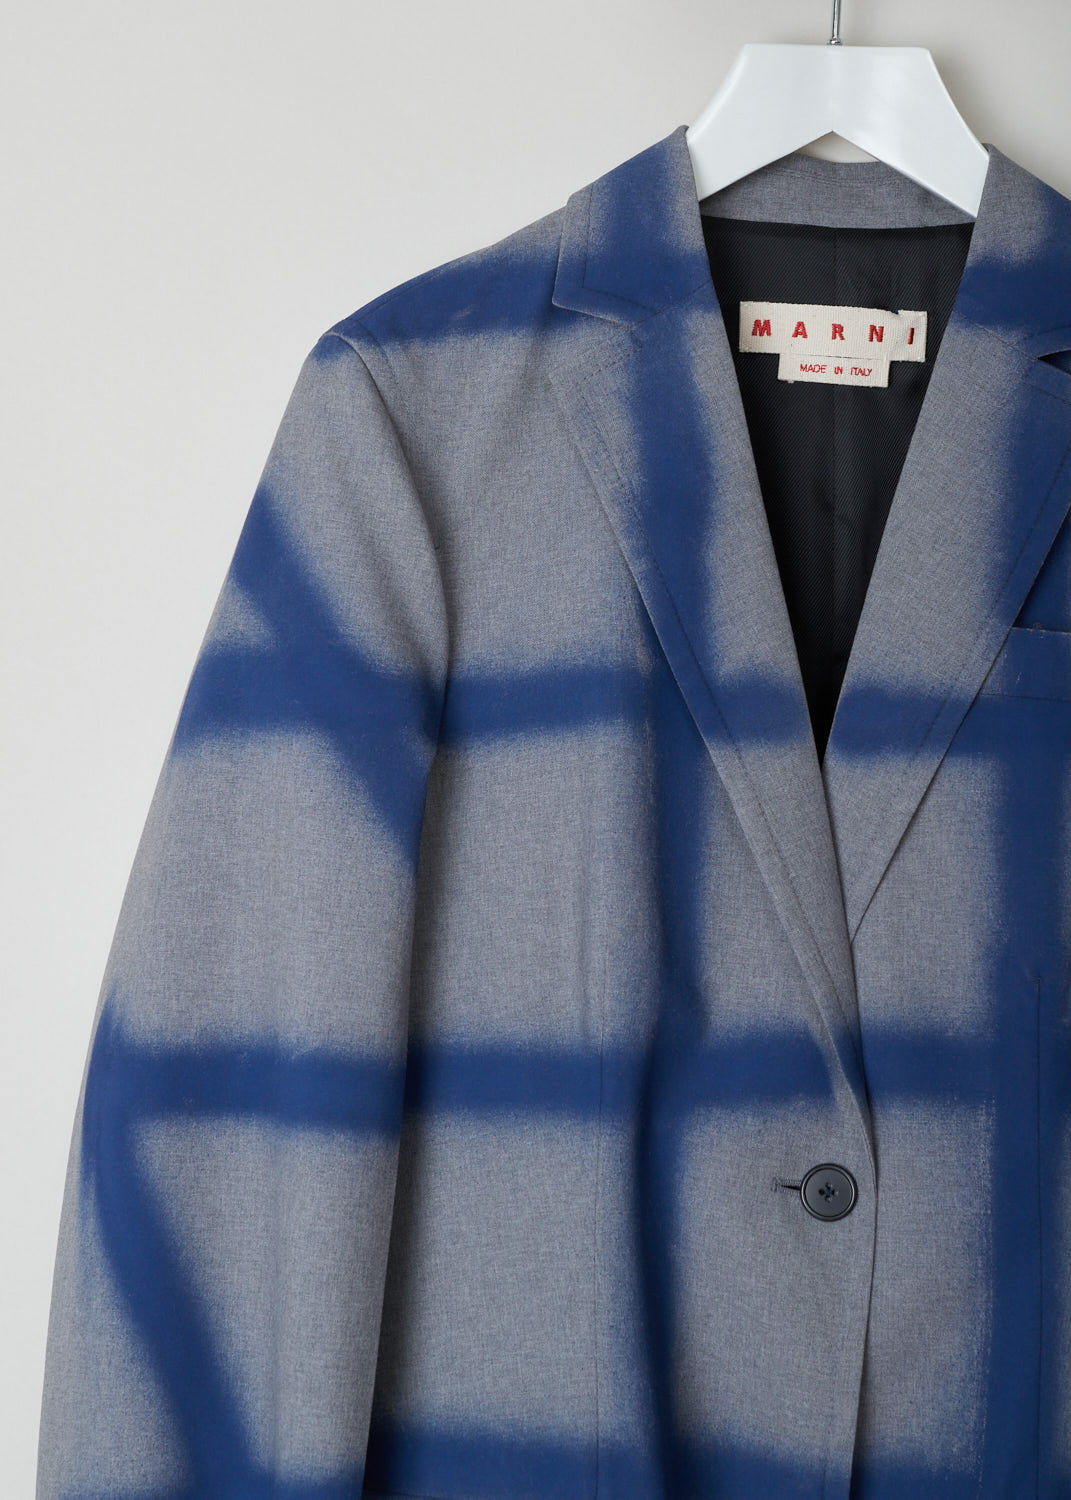 Marni, Checkered overcoat in grey and blue, CPMA0145U6_USCR90_SCB65, blue grey, detail, Knee-long overcoat featuring a blue checkered design on a grey background. The collar that leads into the notched lapel, going further down you will find a single buttoned fastening option. Comes long sleeves supporting three buttons. Furthermore the back of this model is left monotone to emphasize the front. Two flap pockets can be found on the front. 